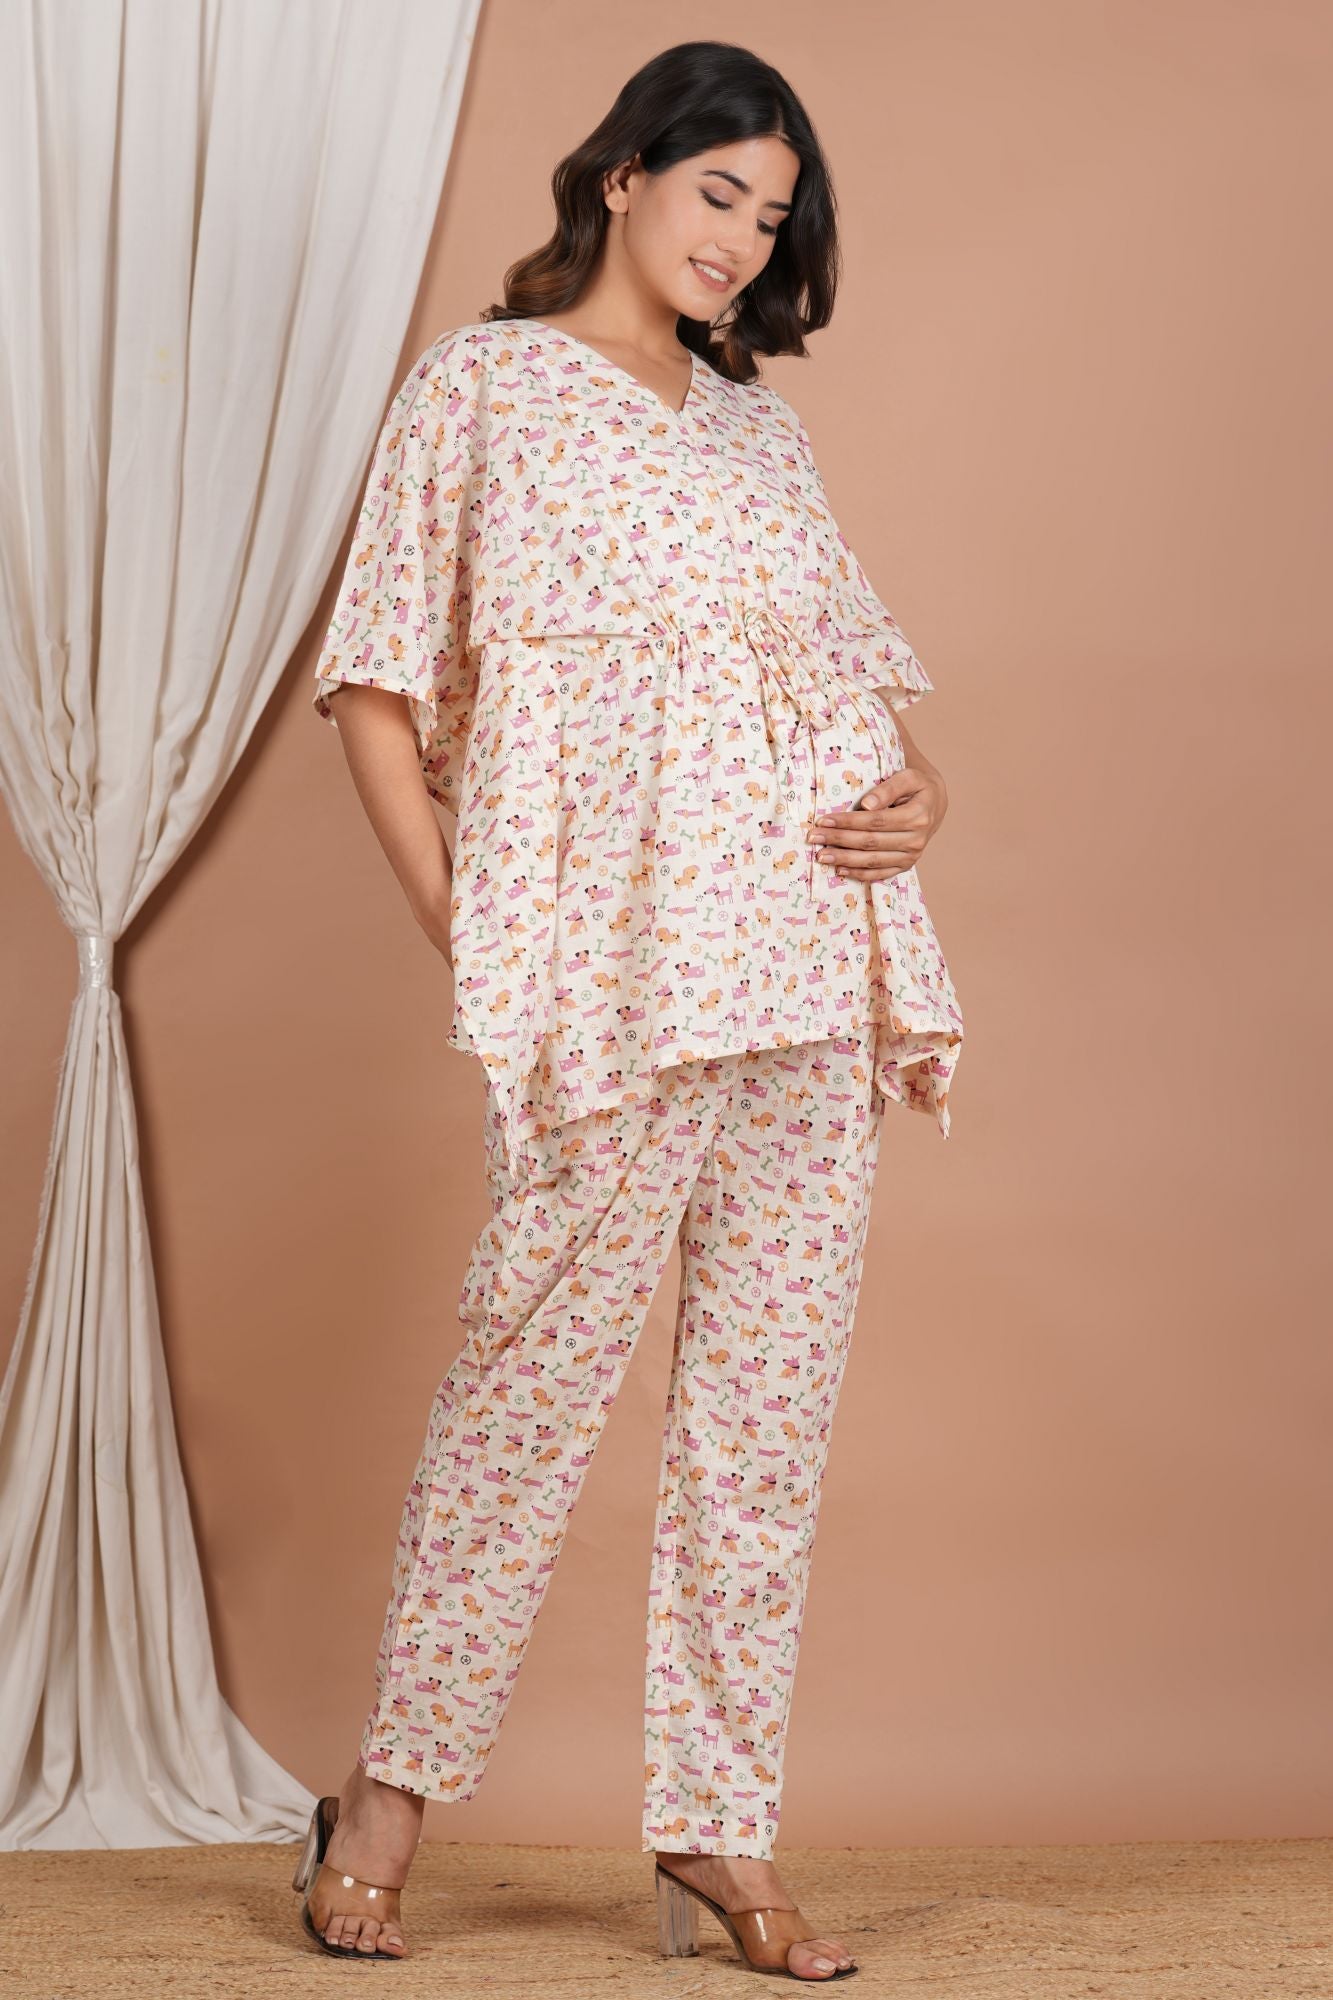 Vyaghra Maternity Loungewear (with zip for Nursing)